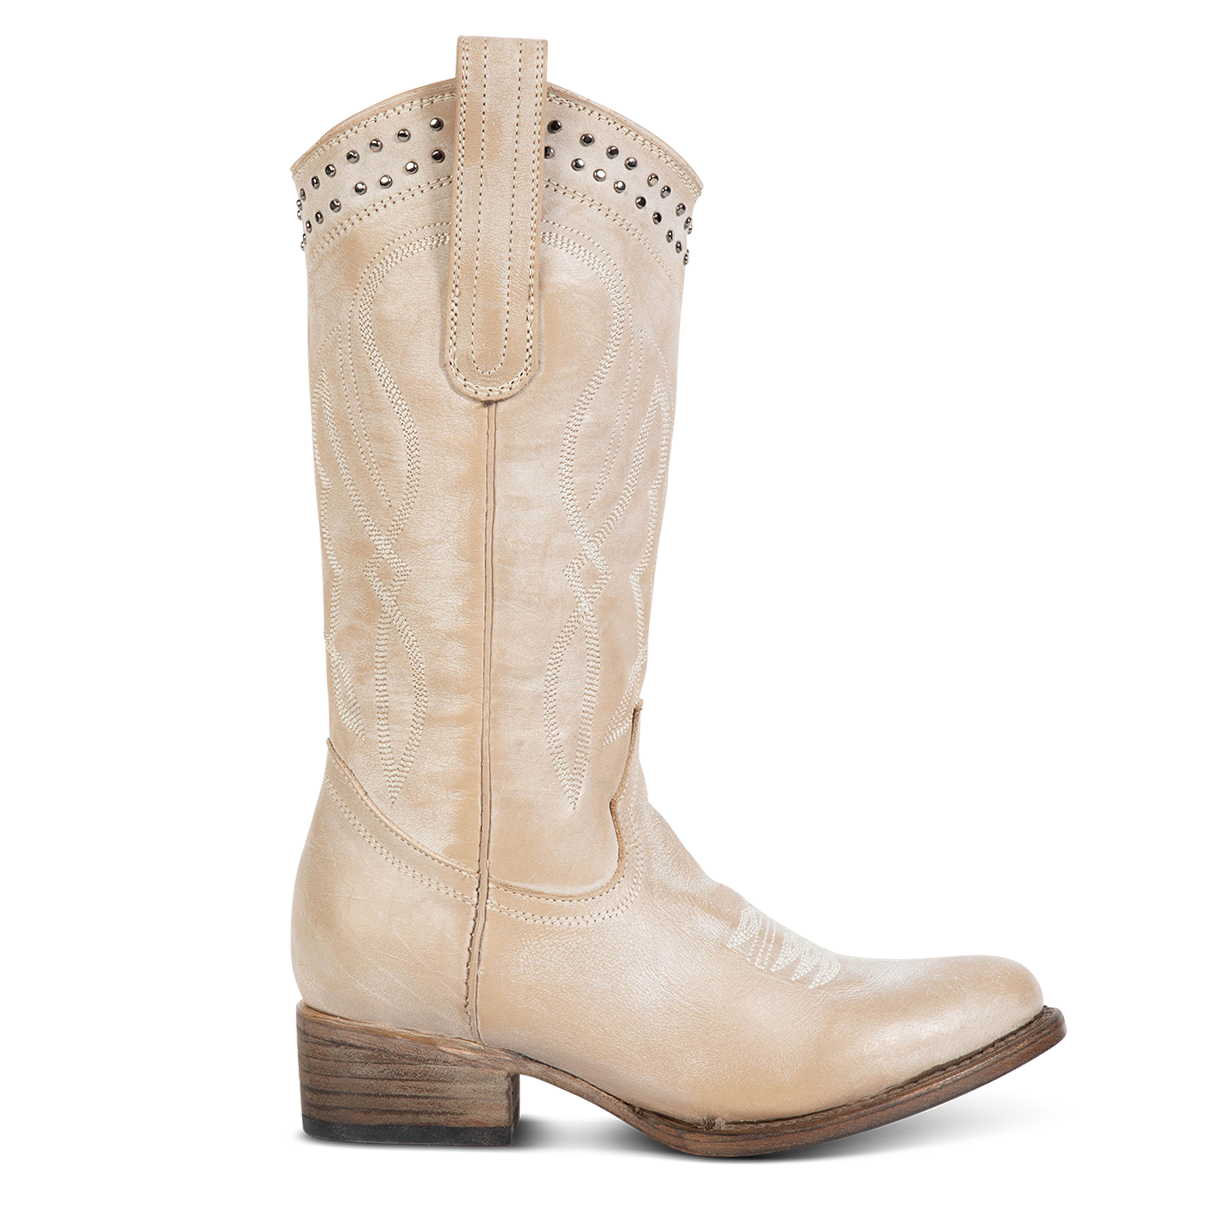 FREEBIRD women's Zion beige slim fit mid calf boot with stud detailing, almond-shaped toe, low heel, and pull on straps